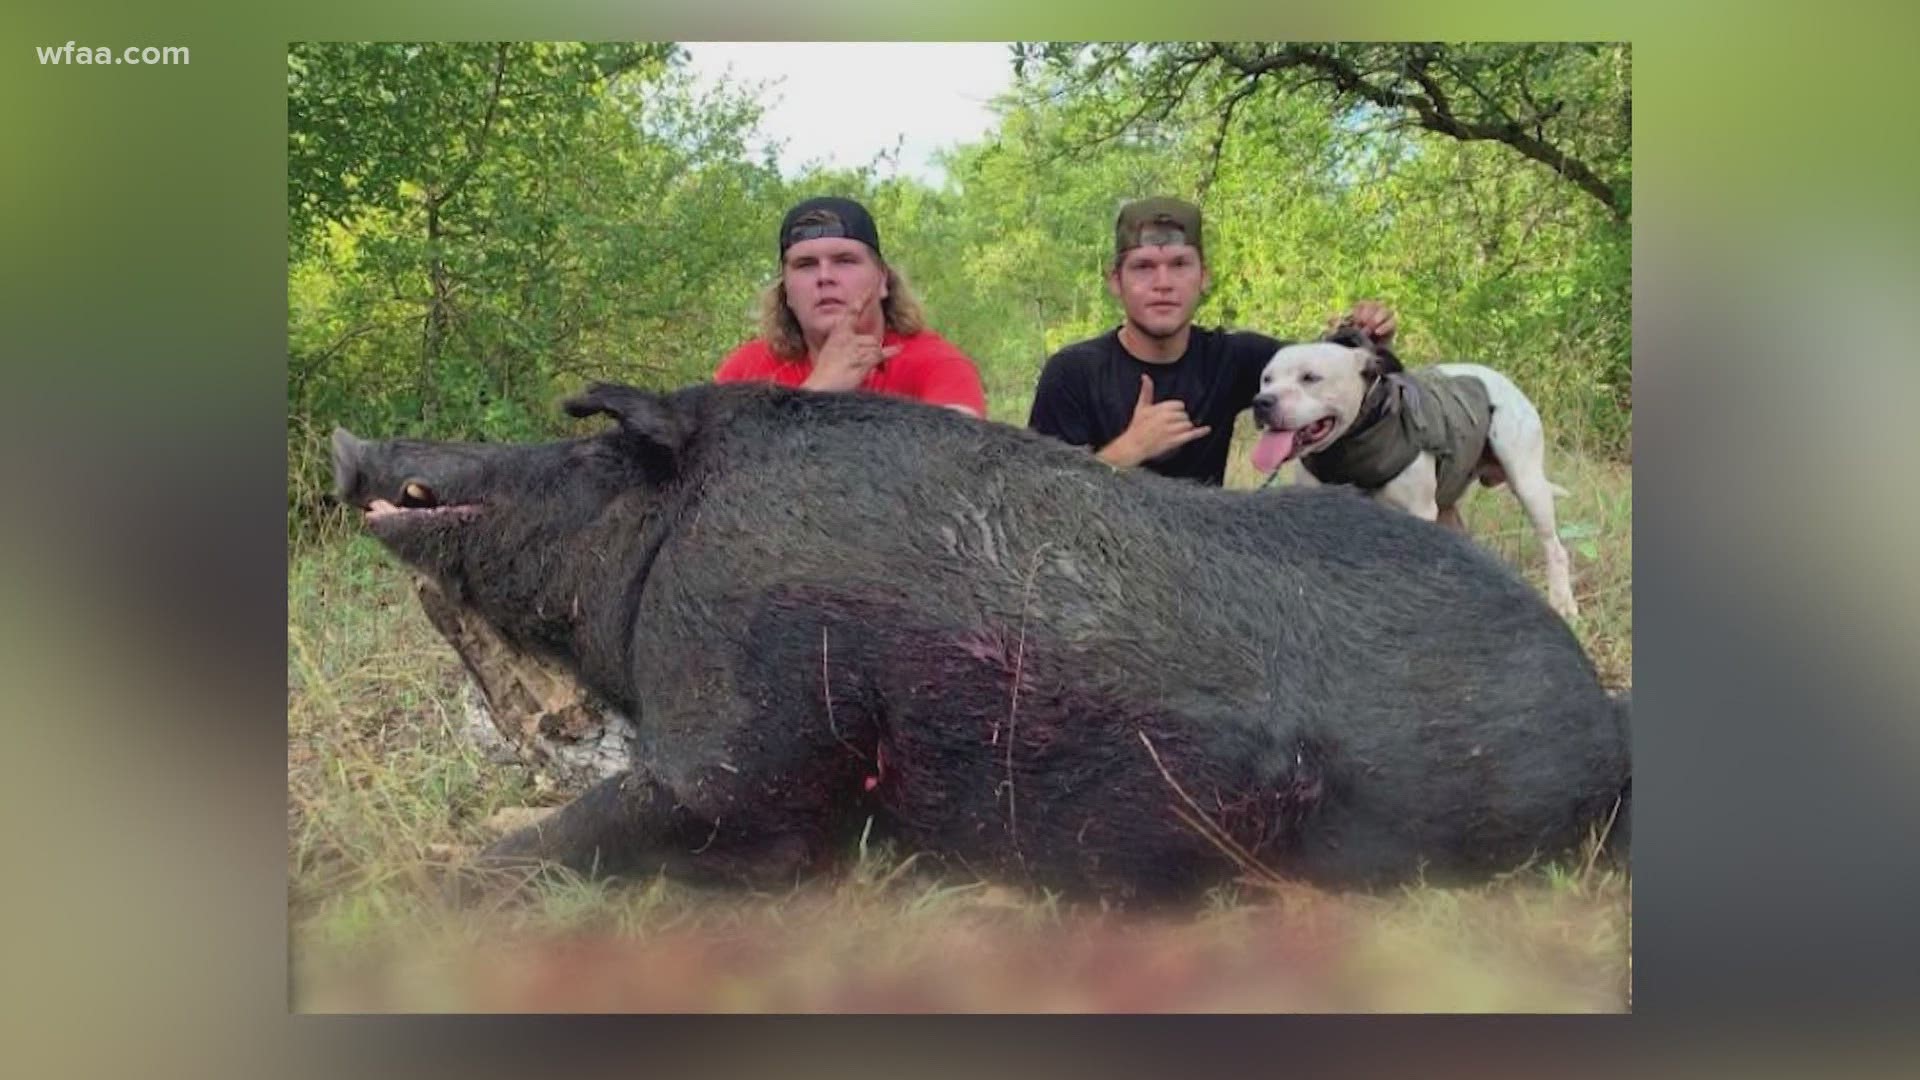 "It might have been the biggest hog we've been upon," Colton Roberts said. "But never expected to catch one that big."